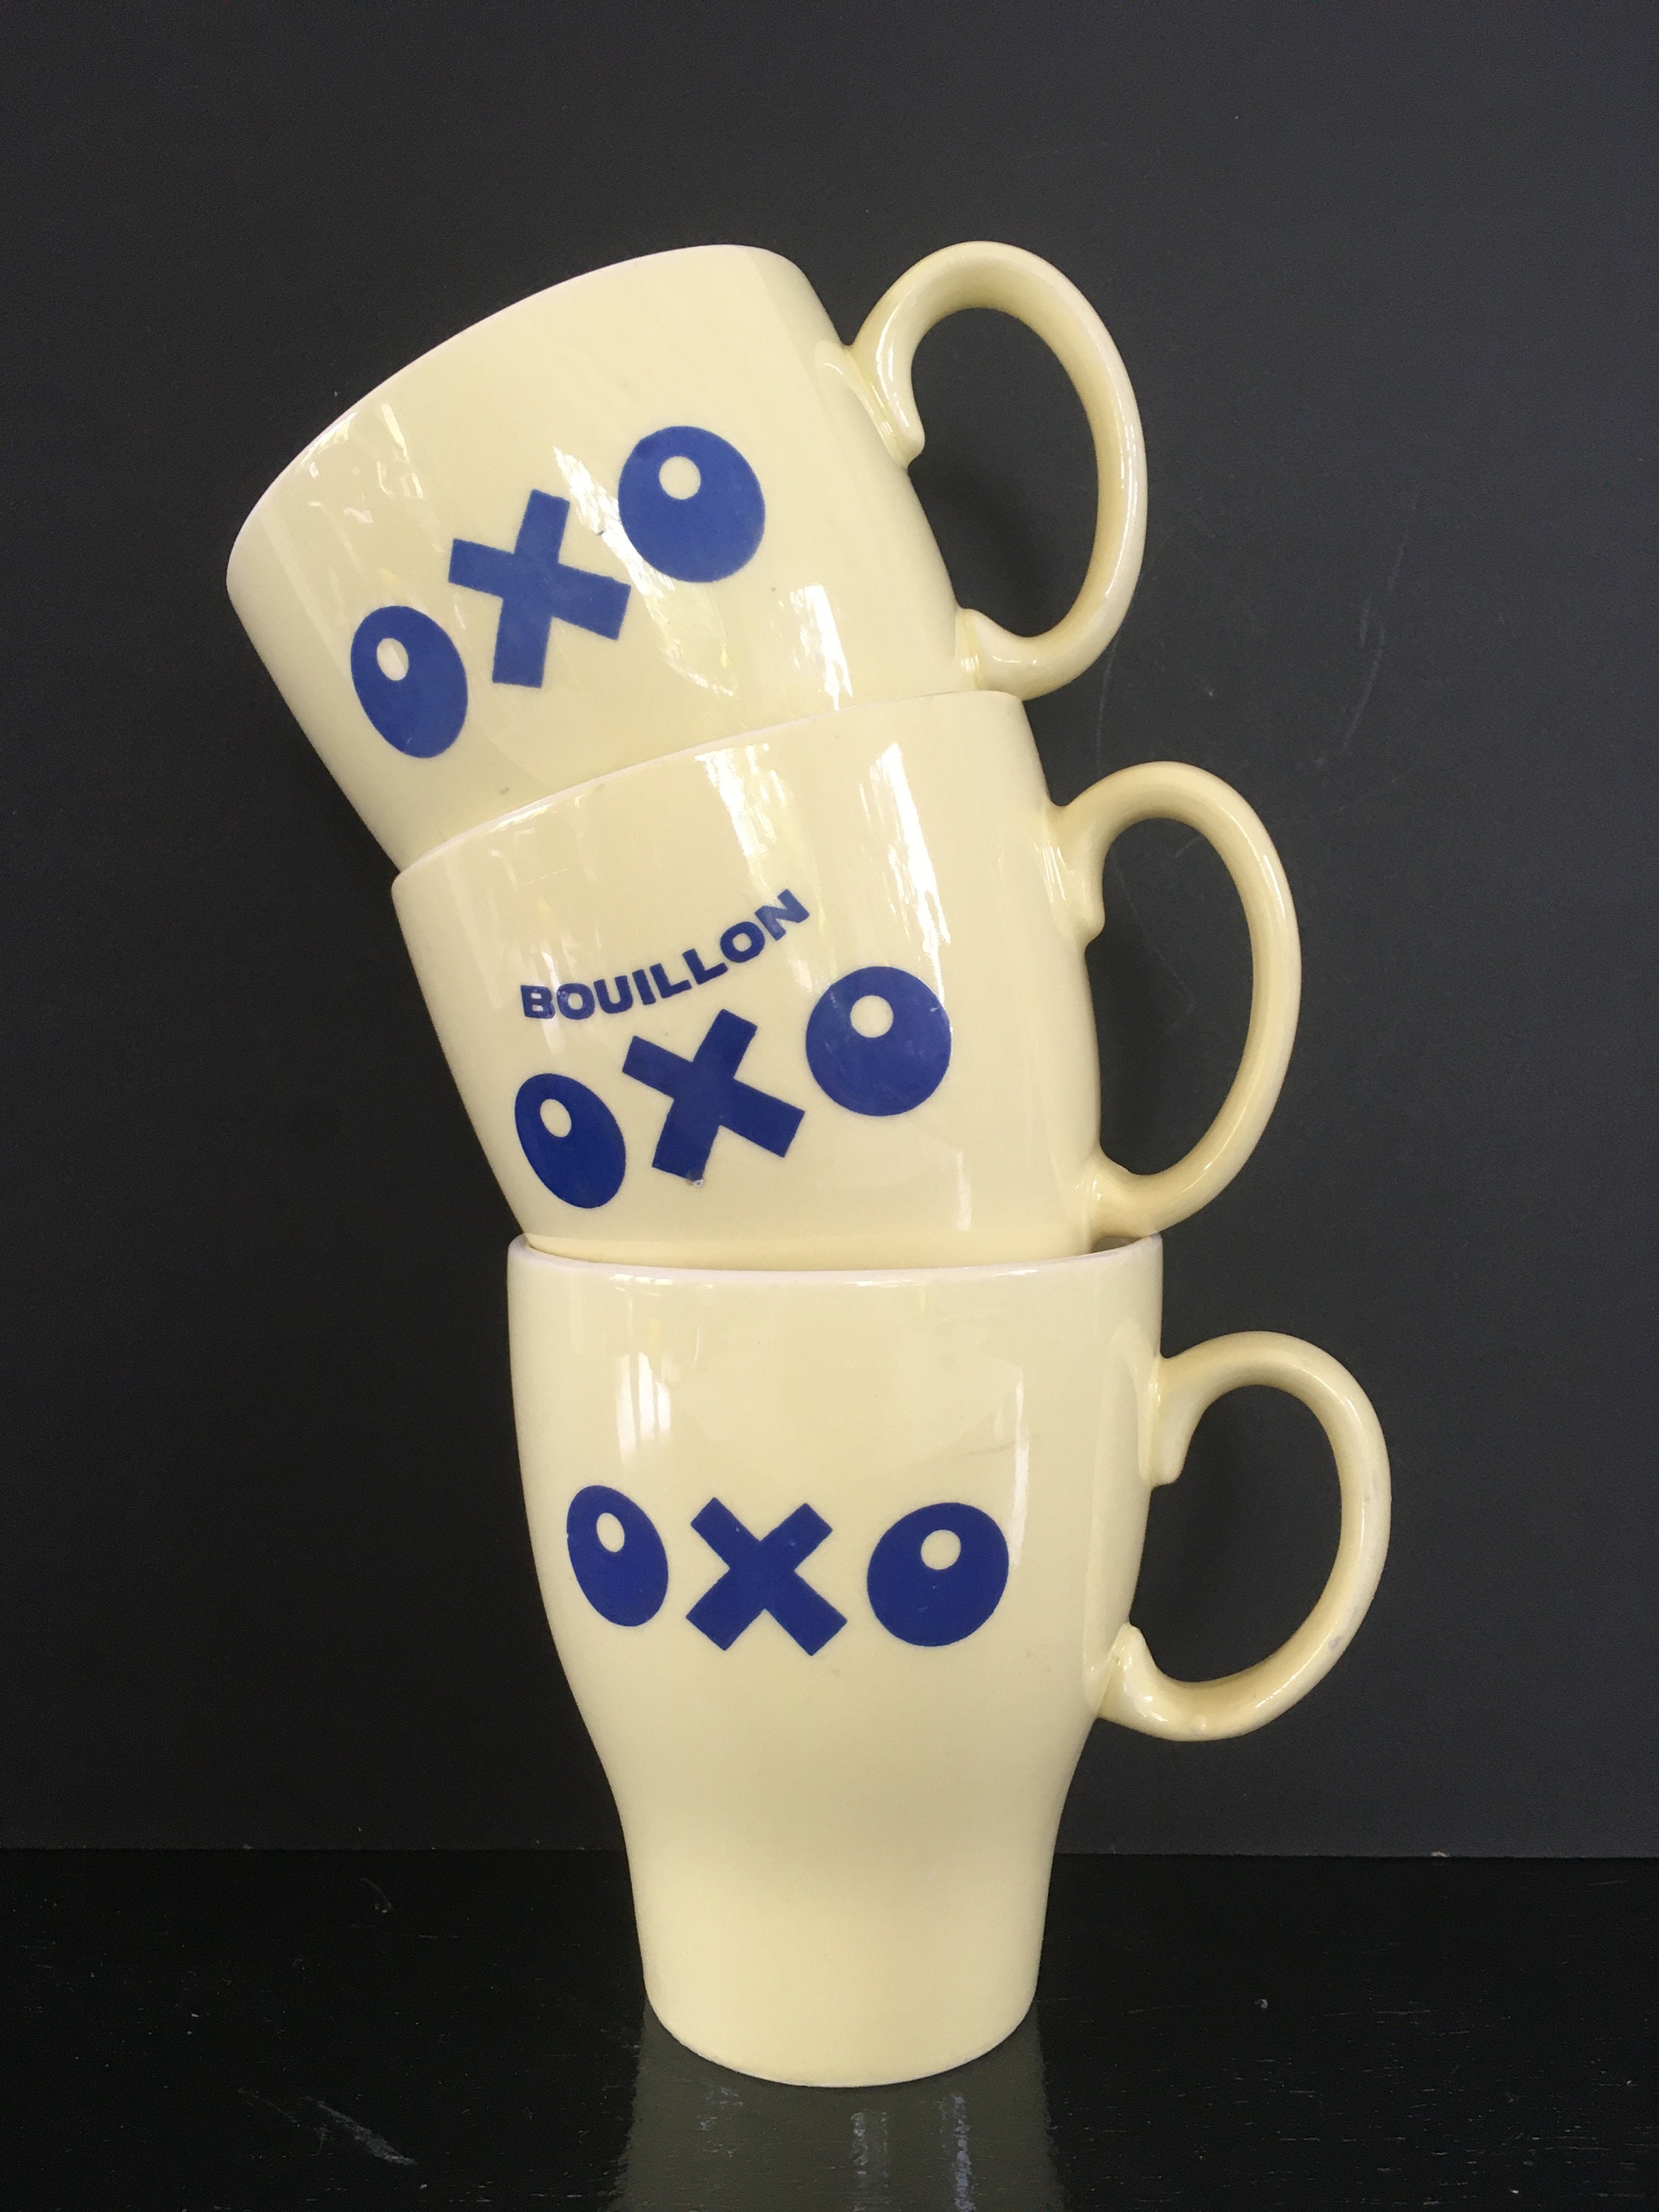 Old Bouillon OXO advertising mug Compagnie Liebig